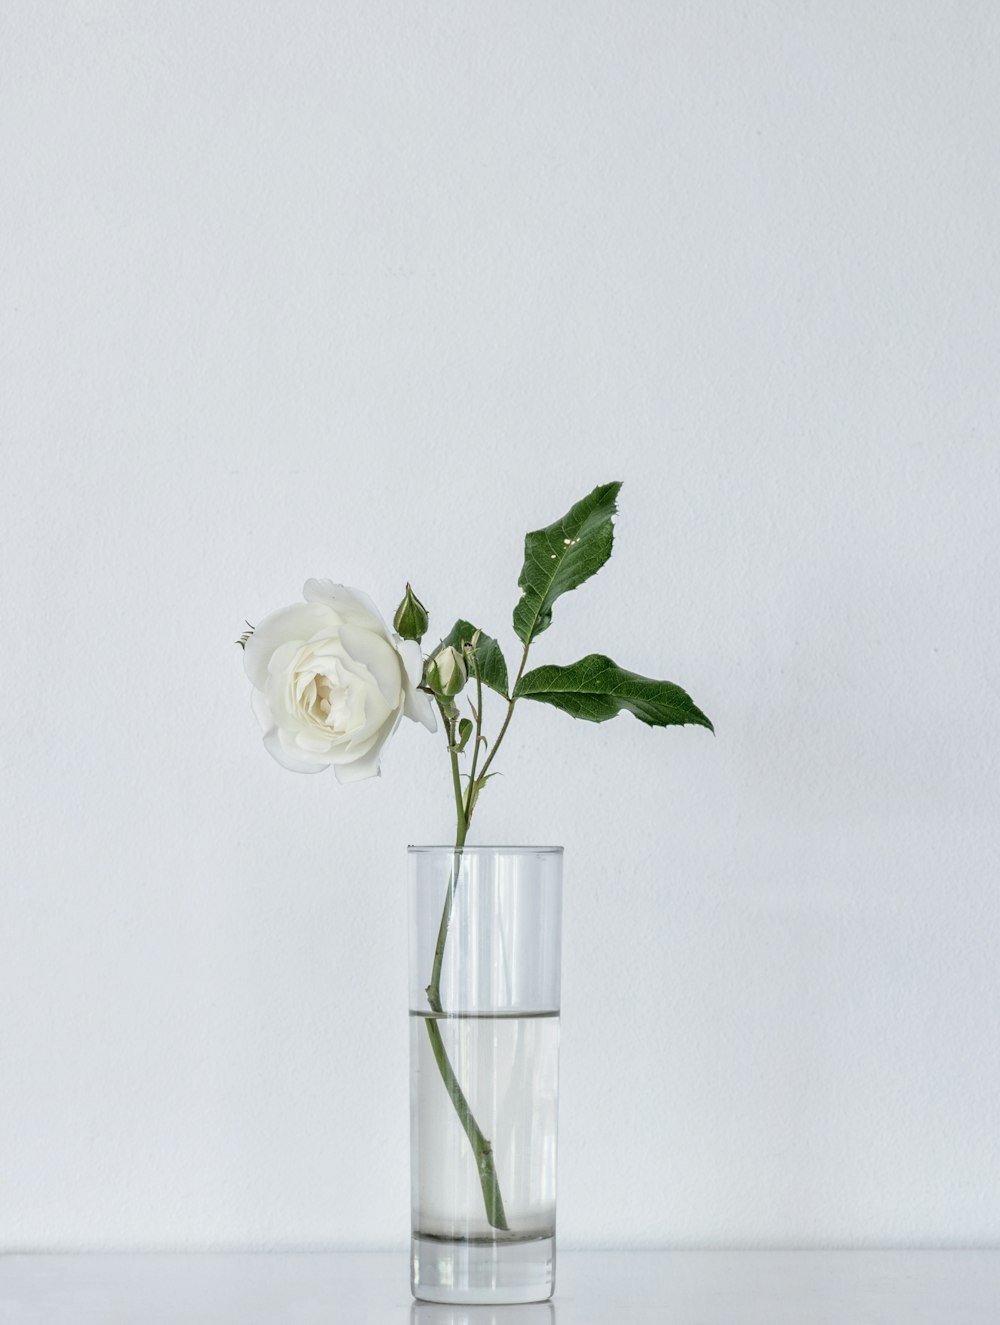 Glass Flower Pictures | Download Free Images on Unsplash